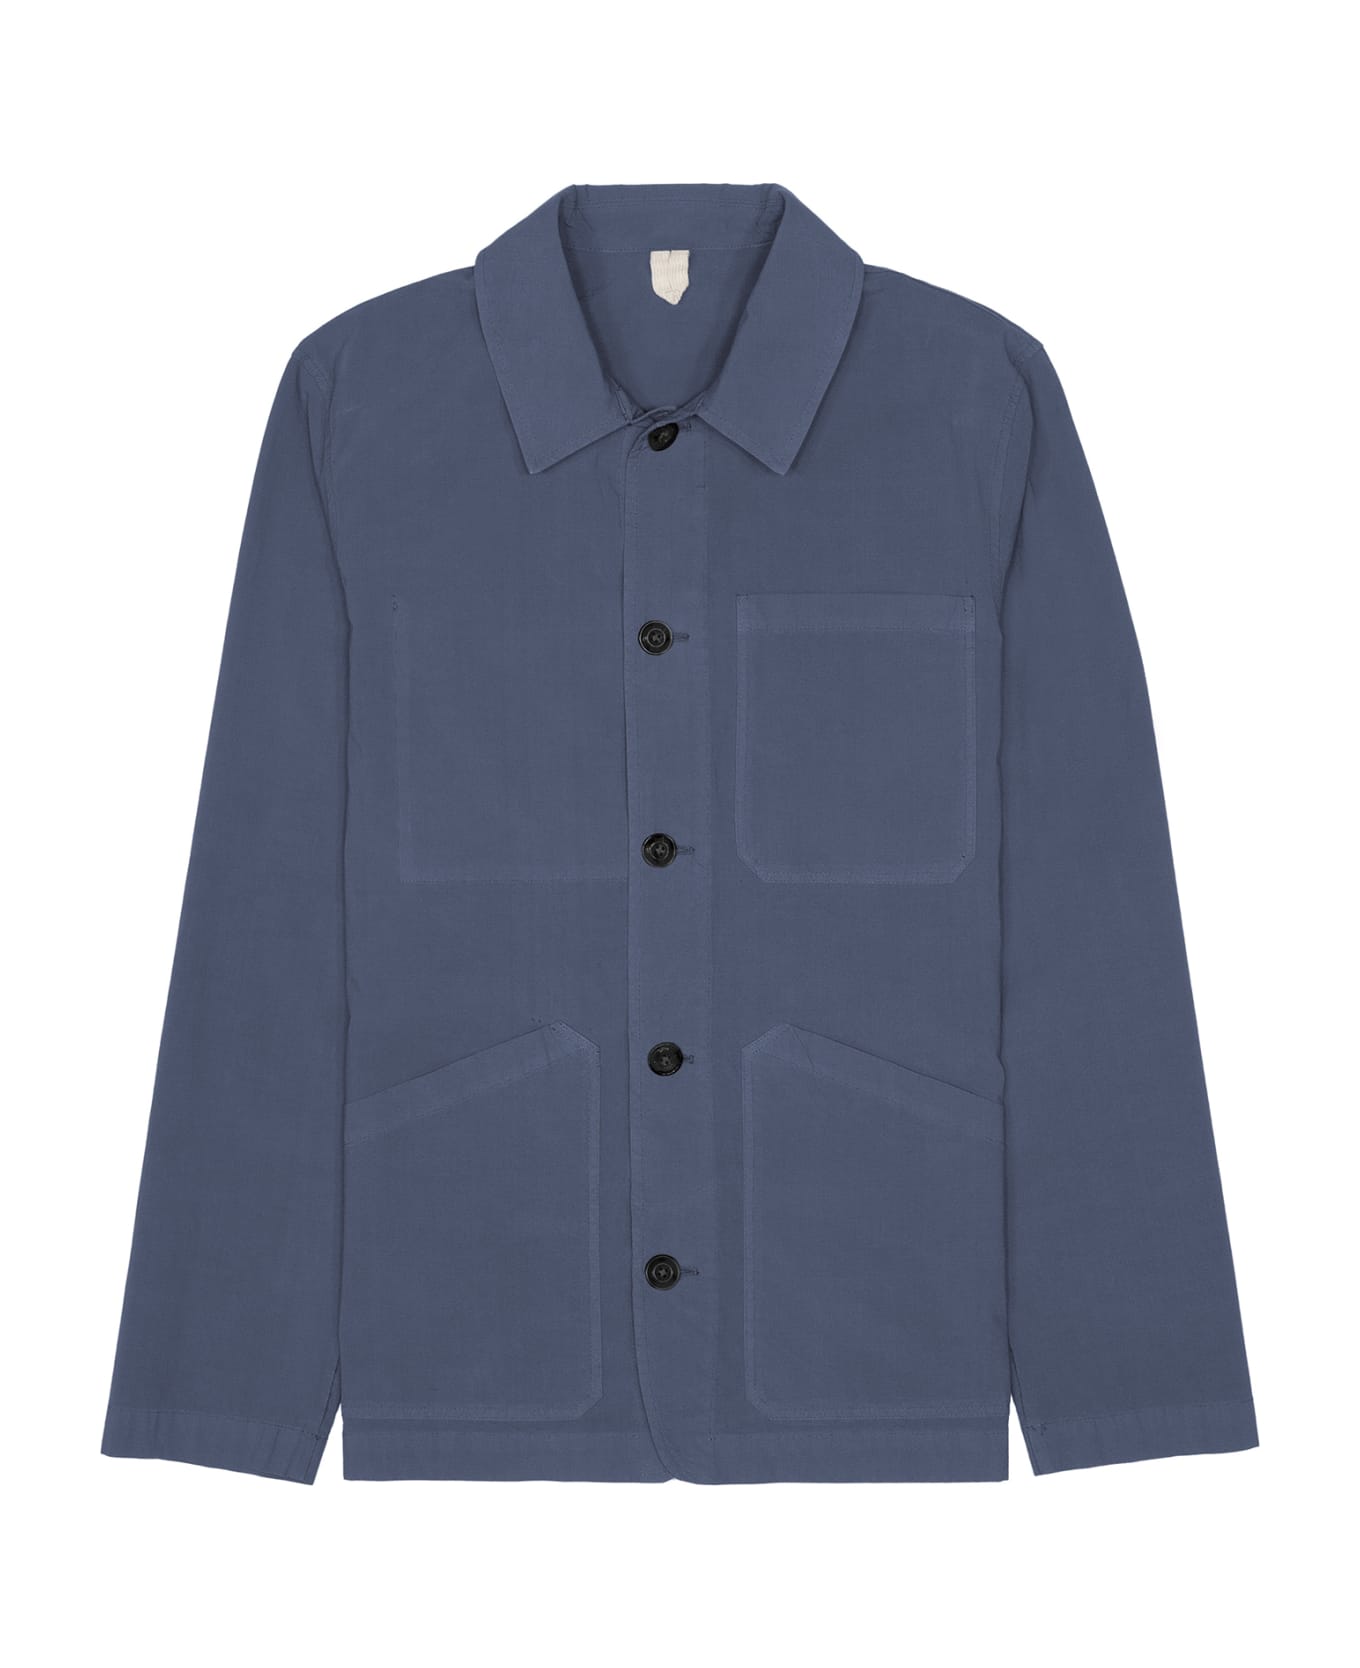 Altea Air Force Blue Cotton Jacket With Buttons - AVIO ジャケット